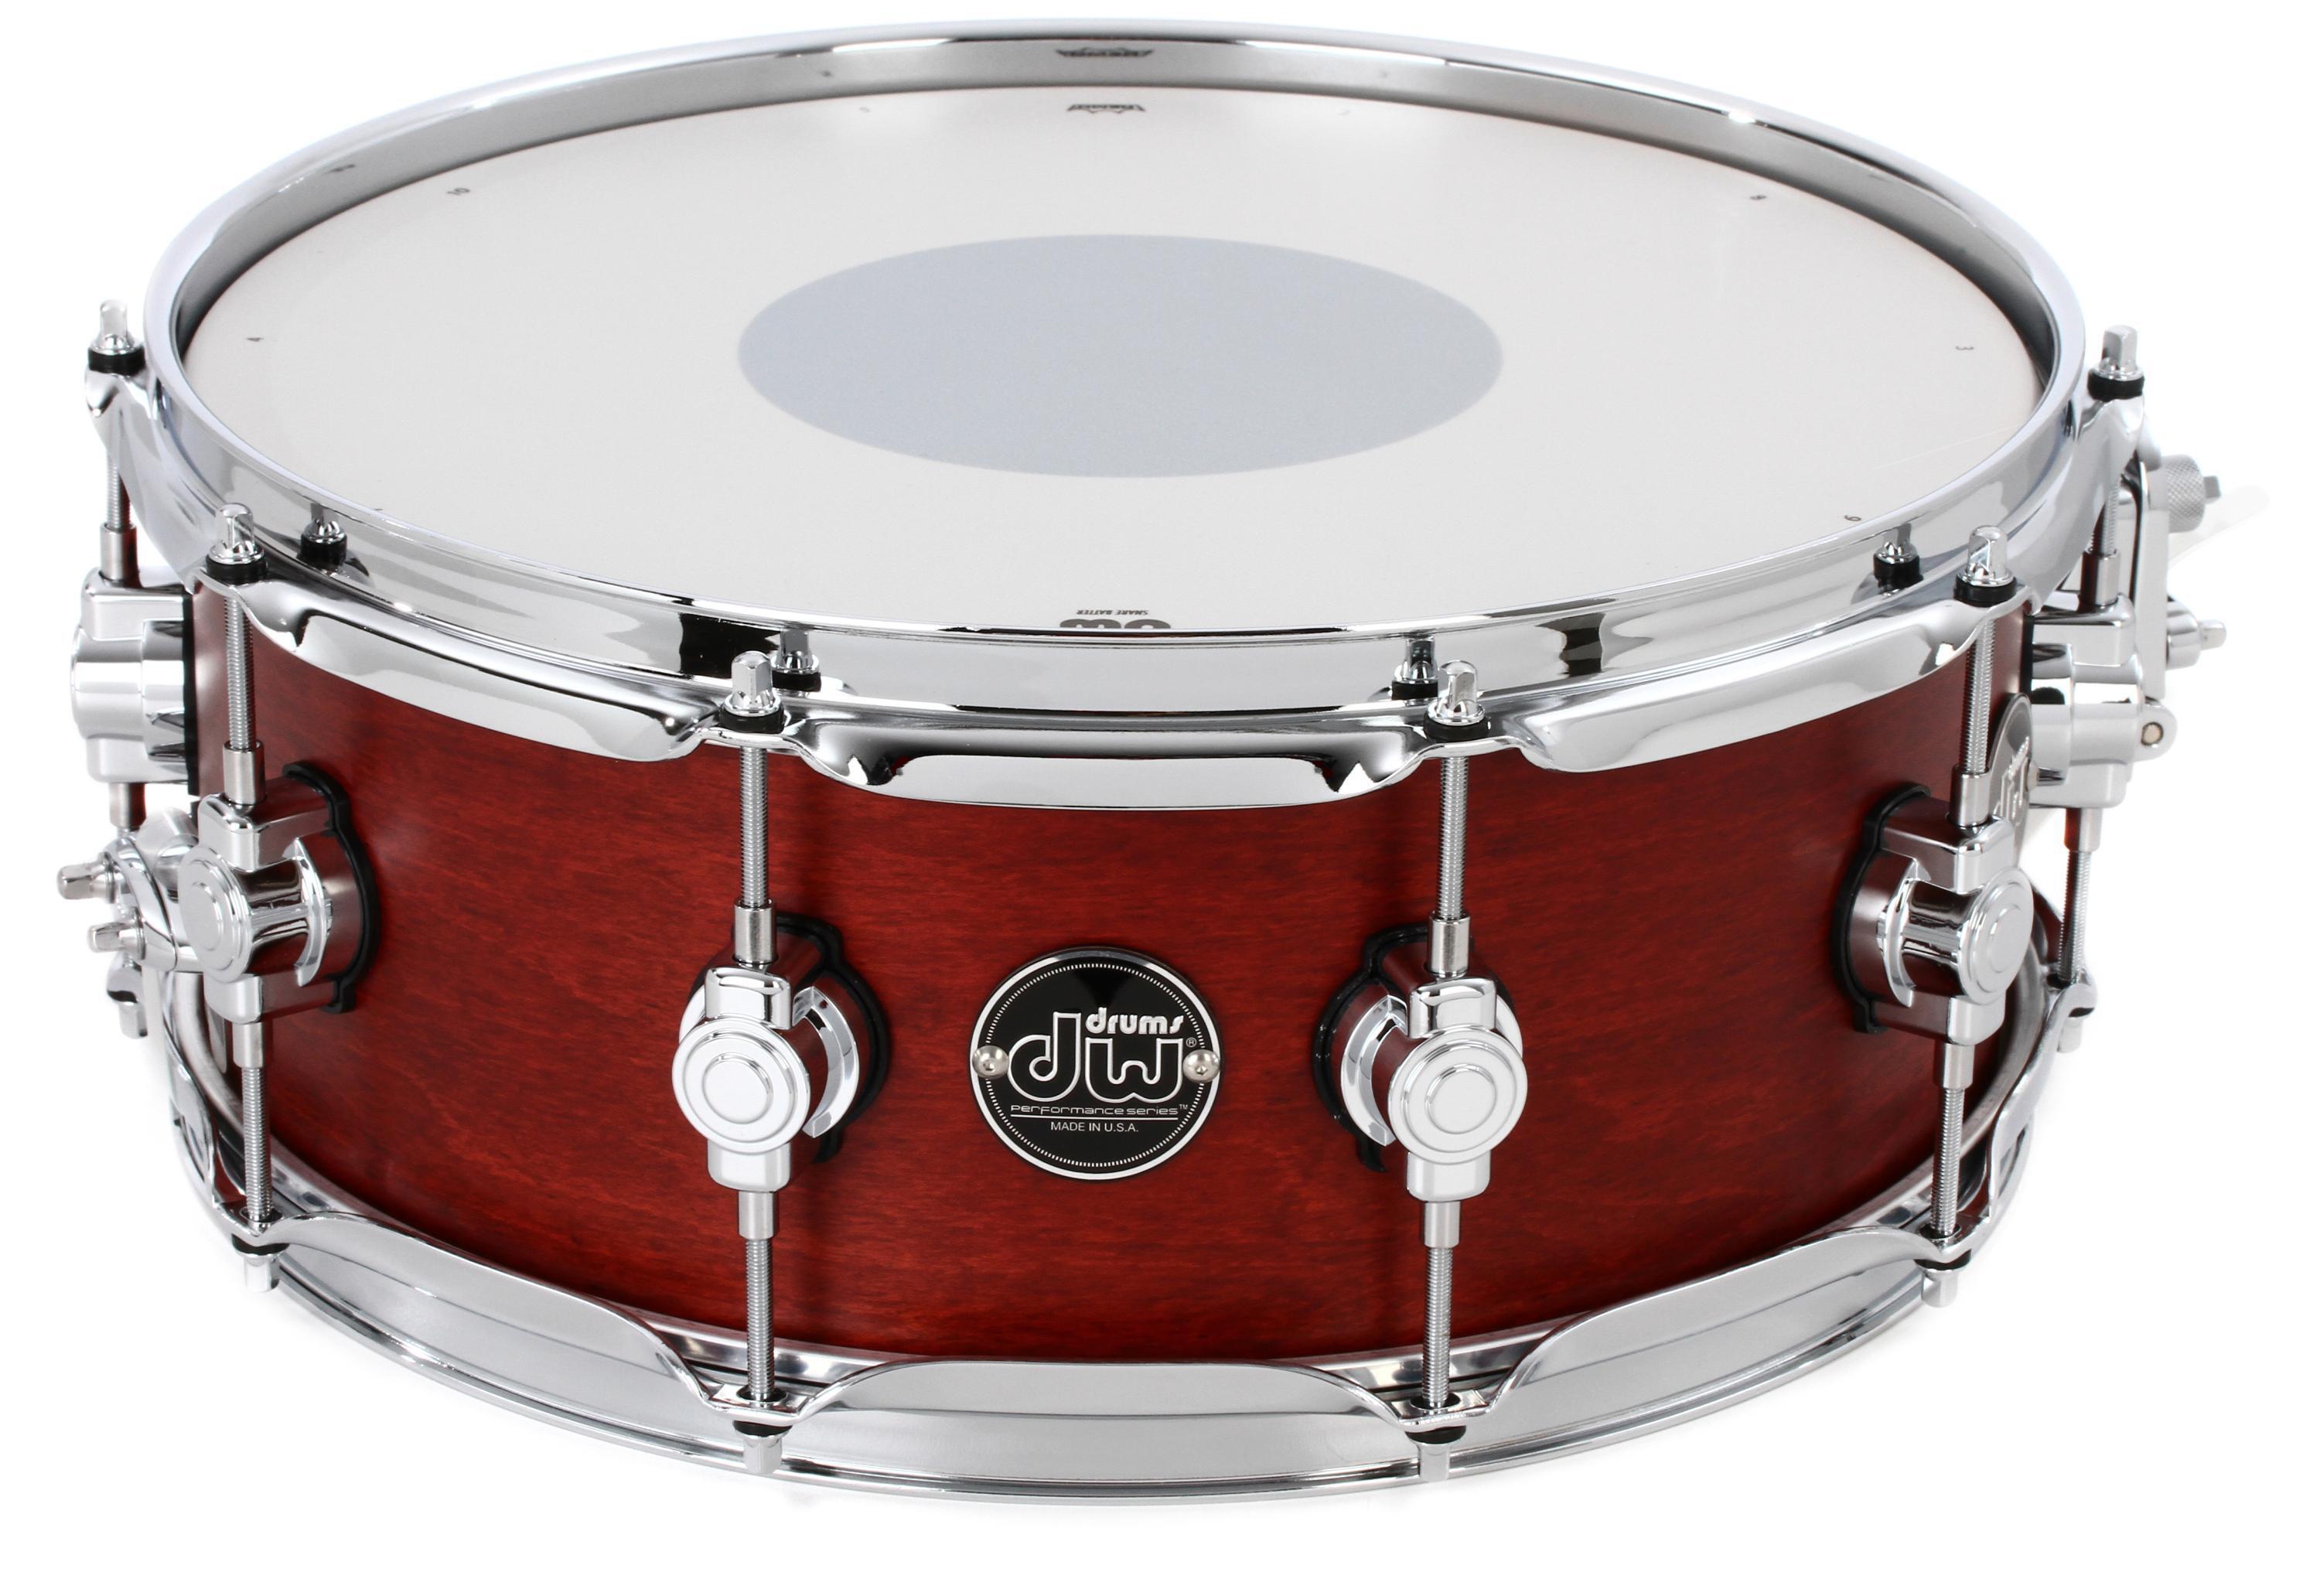 DW Performance Series Snare Drum - 5.5 x 14 inch - Tobacco Satin Oil